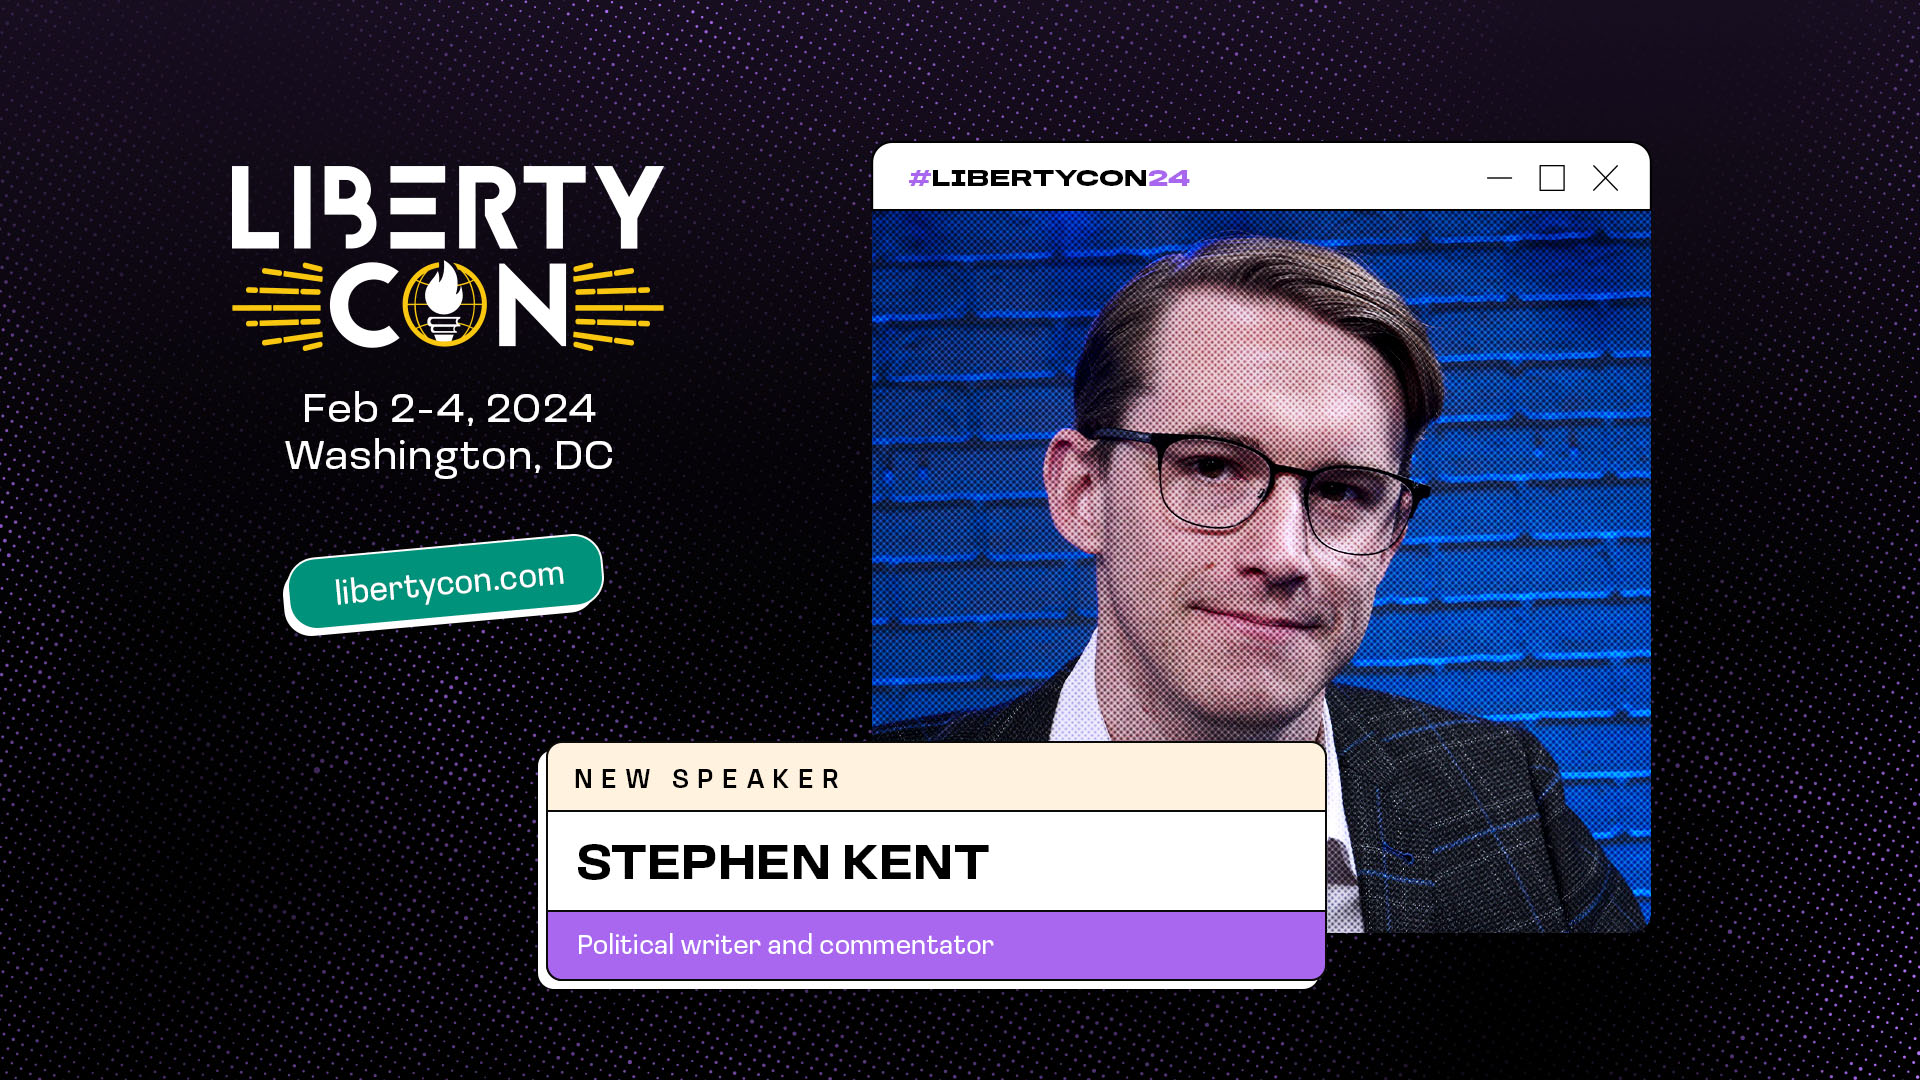 Students For Liberty is delighted to announce two more speakers for LibertyCon International 2024: Stephen Kent and David Preston